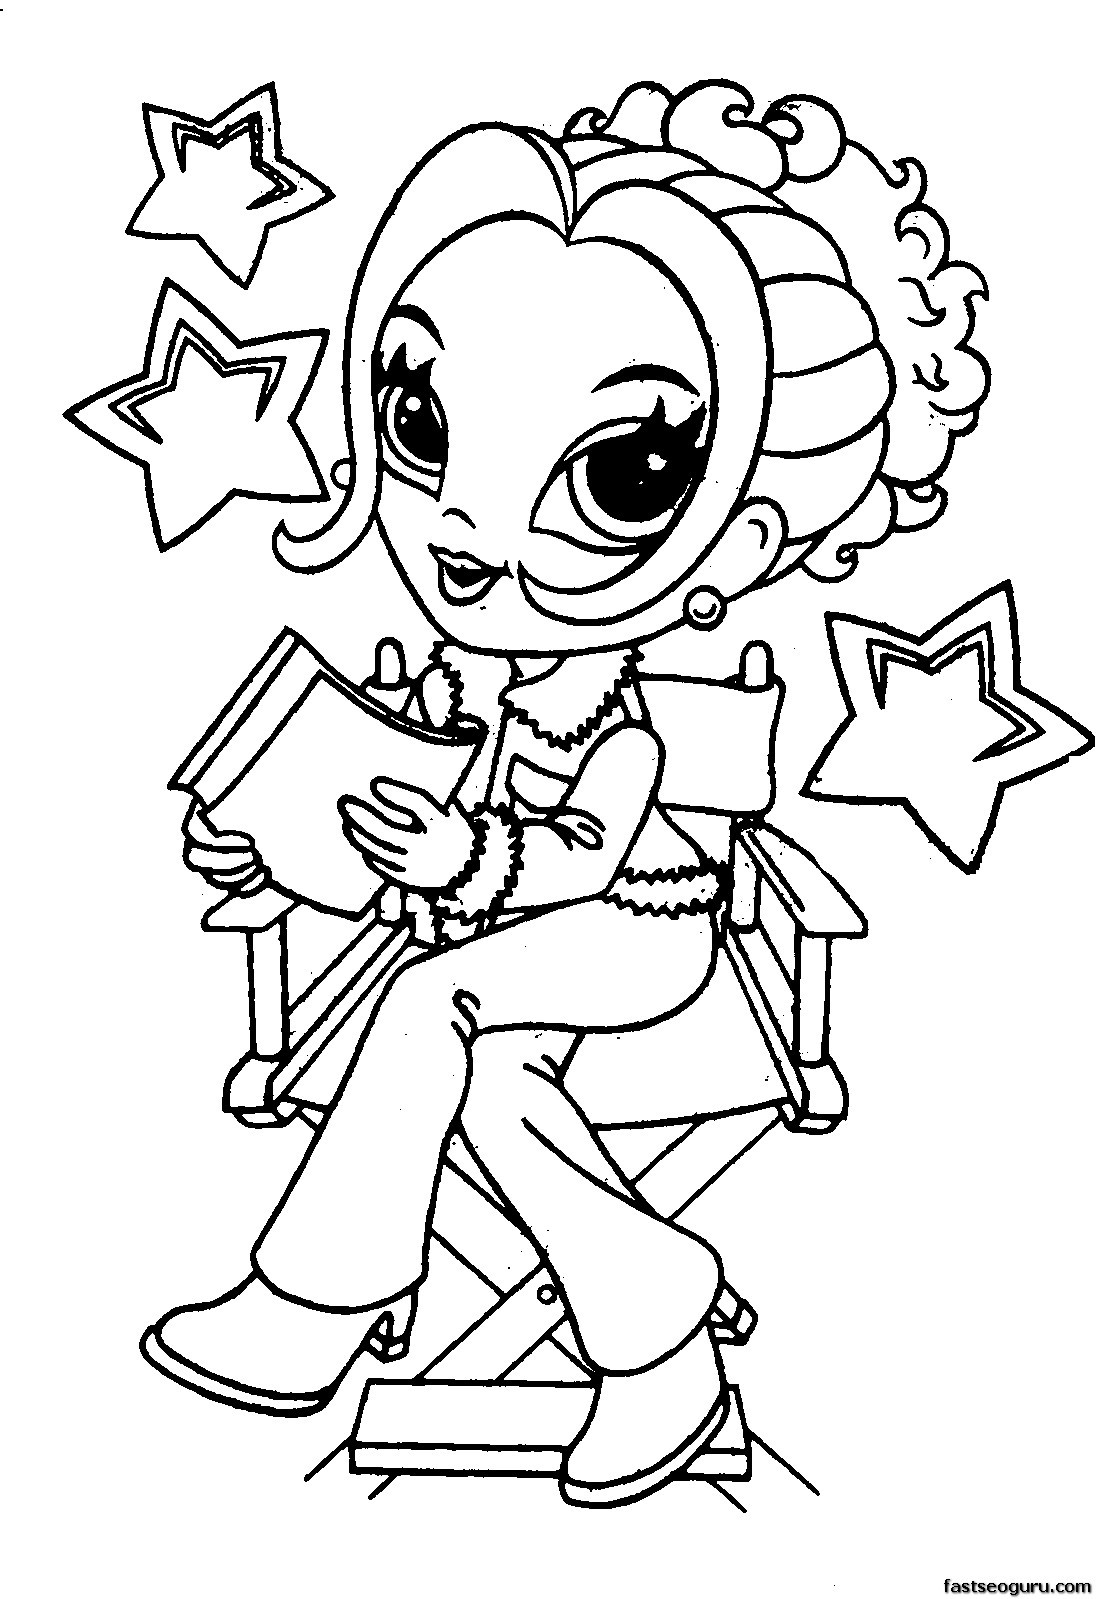 Best ideas about Coloring Pages For Girls Online
. Save or Pin coloring pages for girls 10 and up Now.